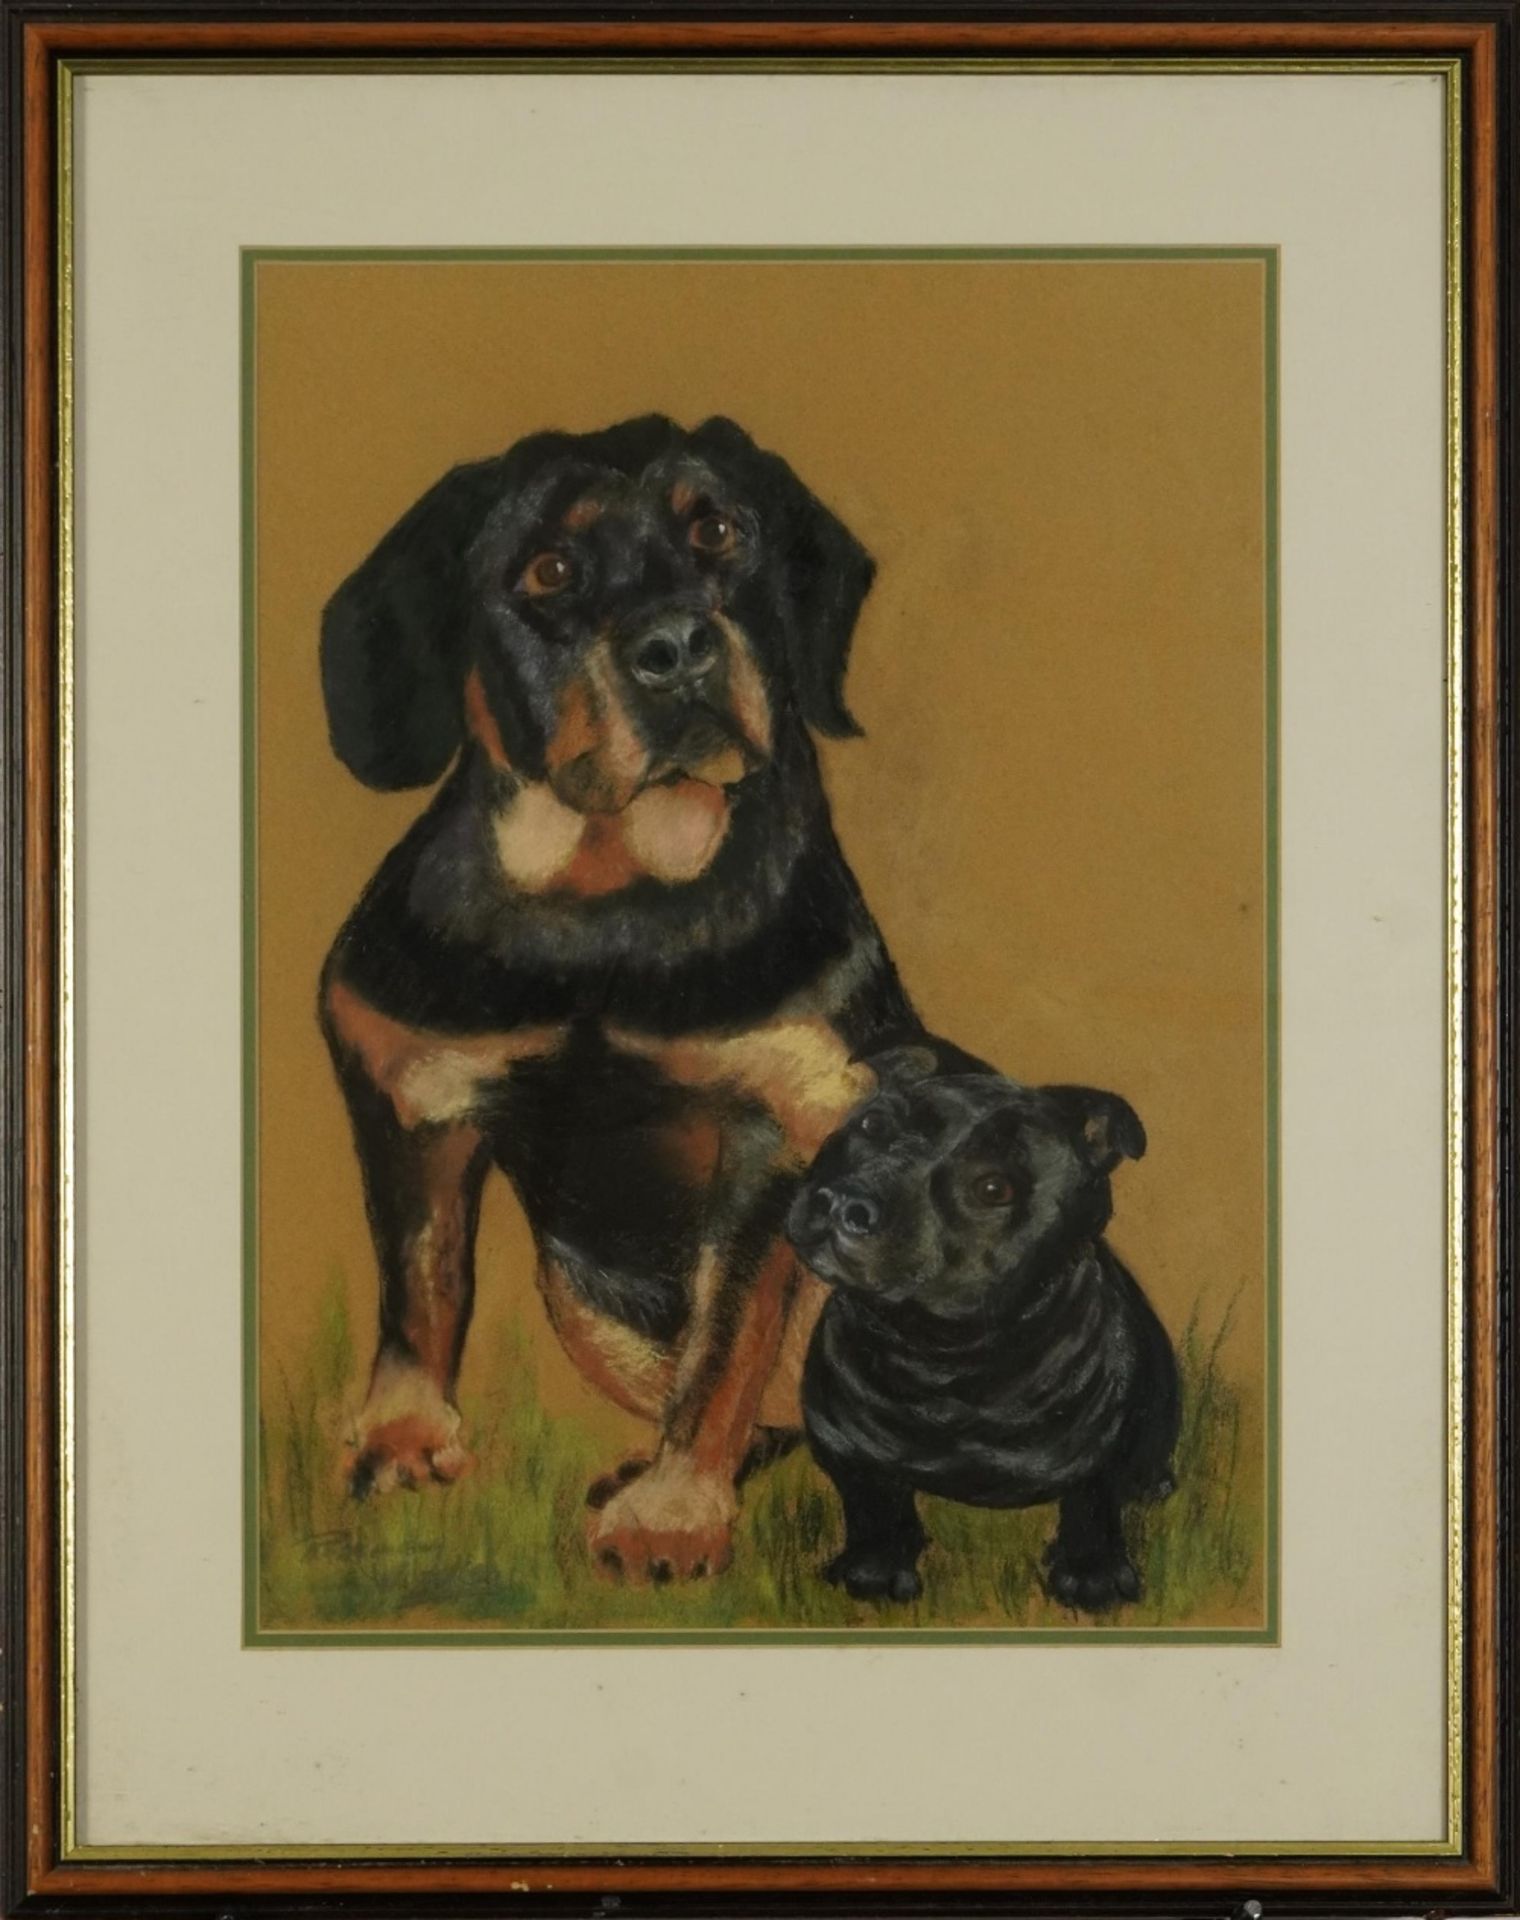 Study of two seated dogs, pastel, indistinctly signed, possibly Rosemary Woodley, mounted, framed - Image 2 of 4